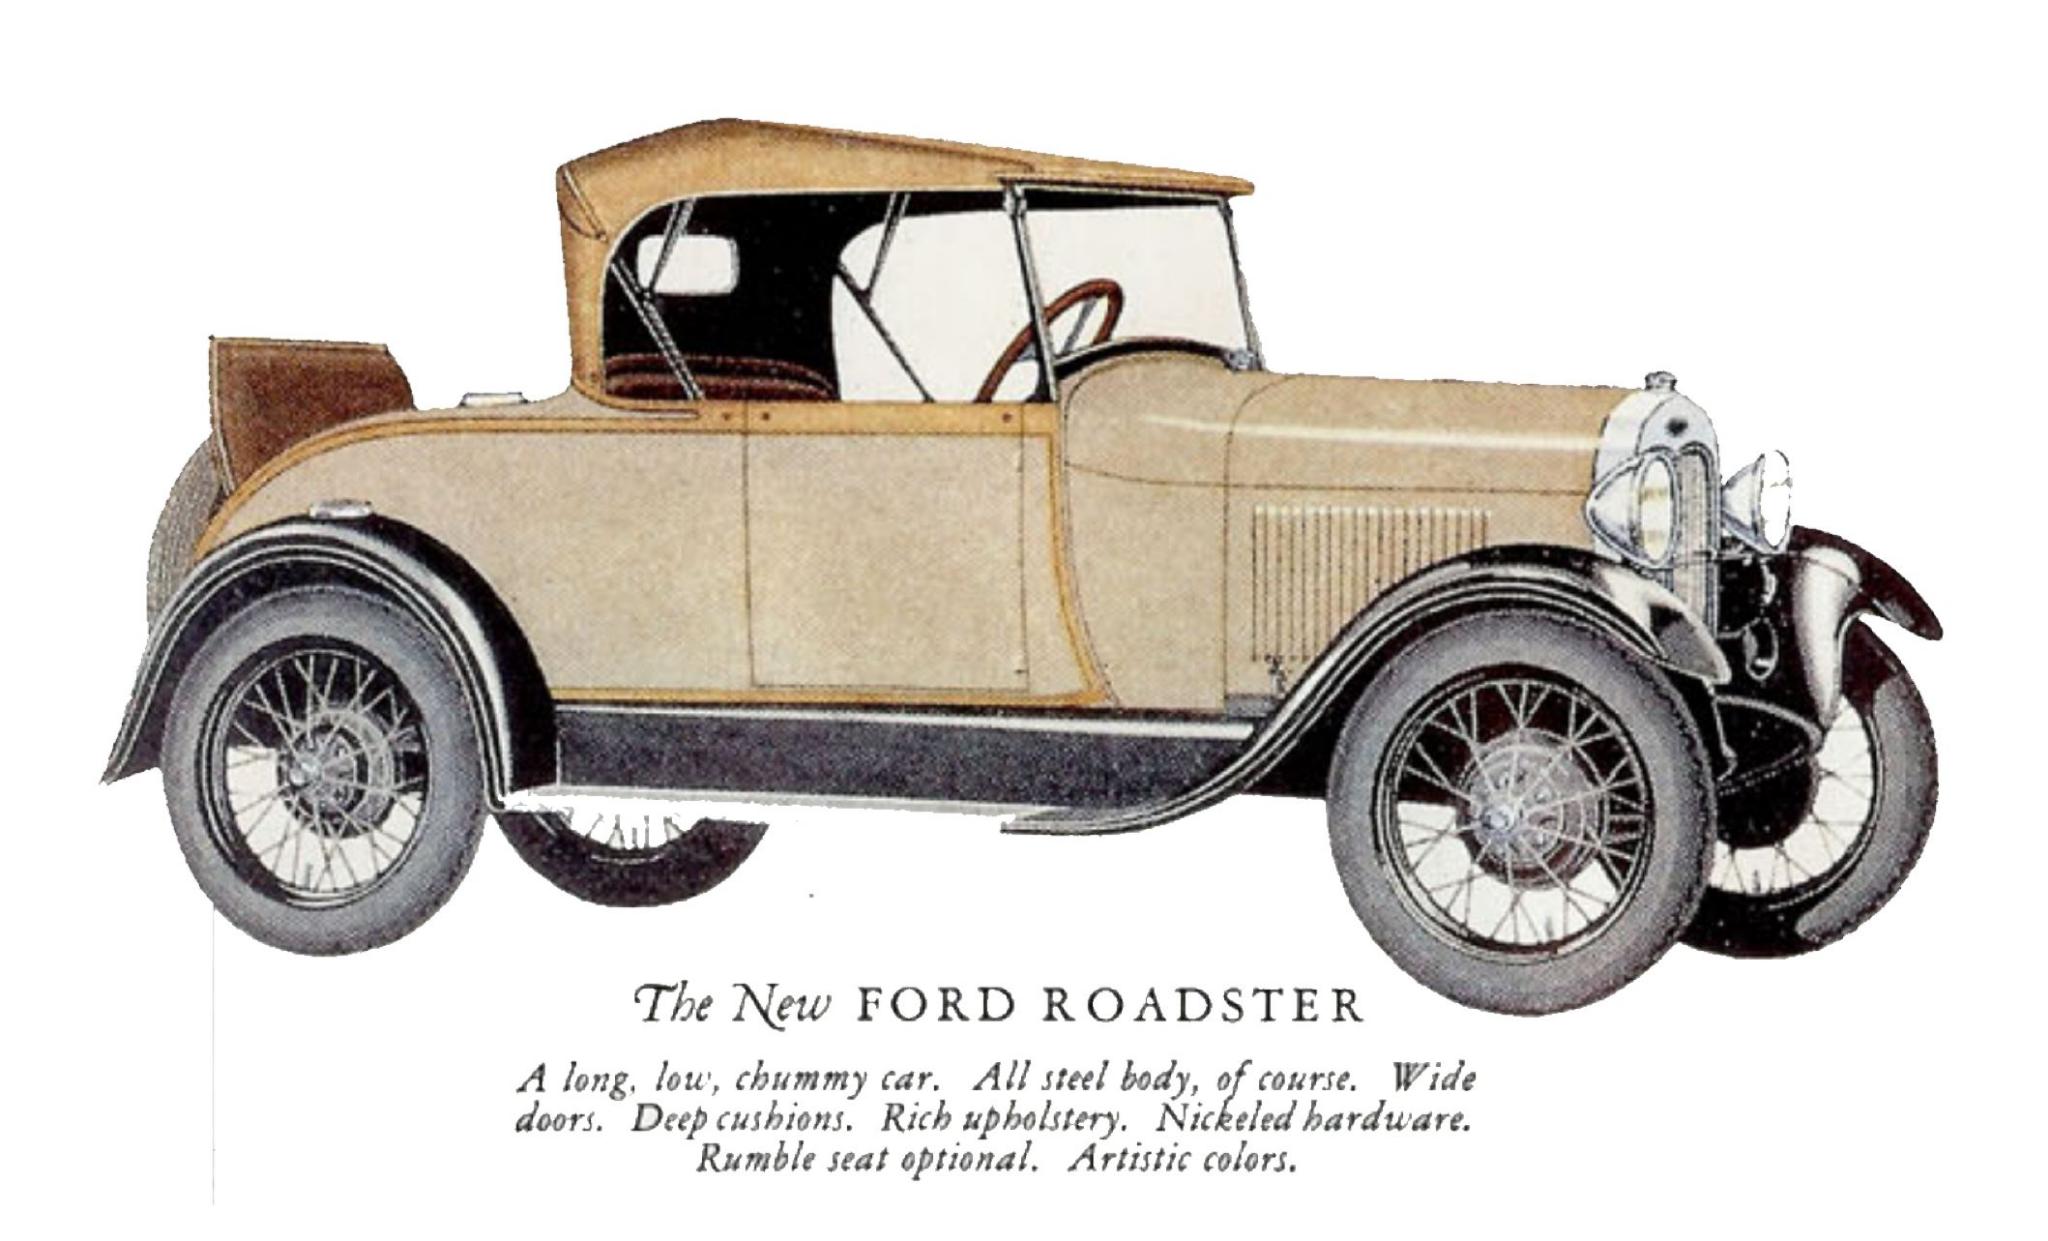 Sketch of a 1928 ford roadster model a from the ford brochure